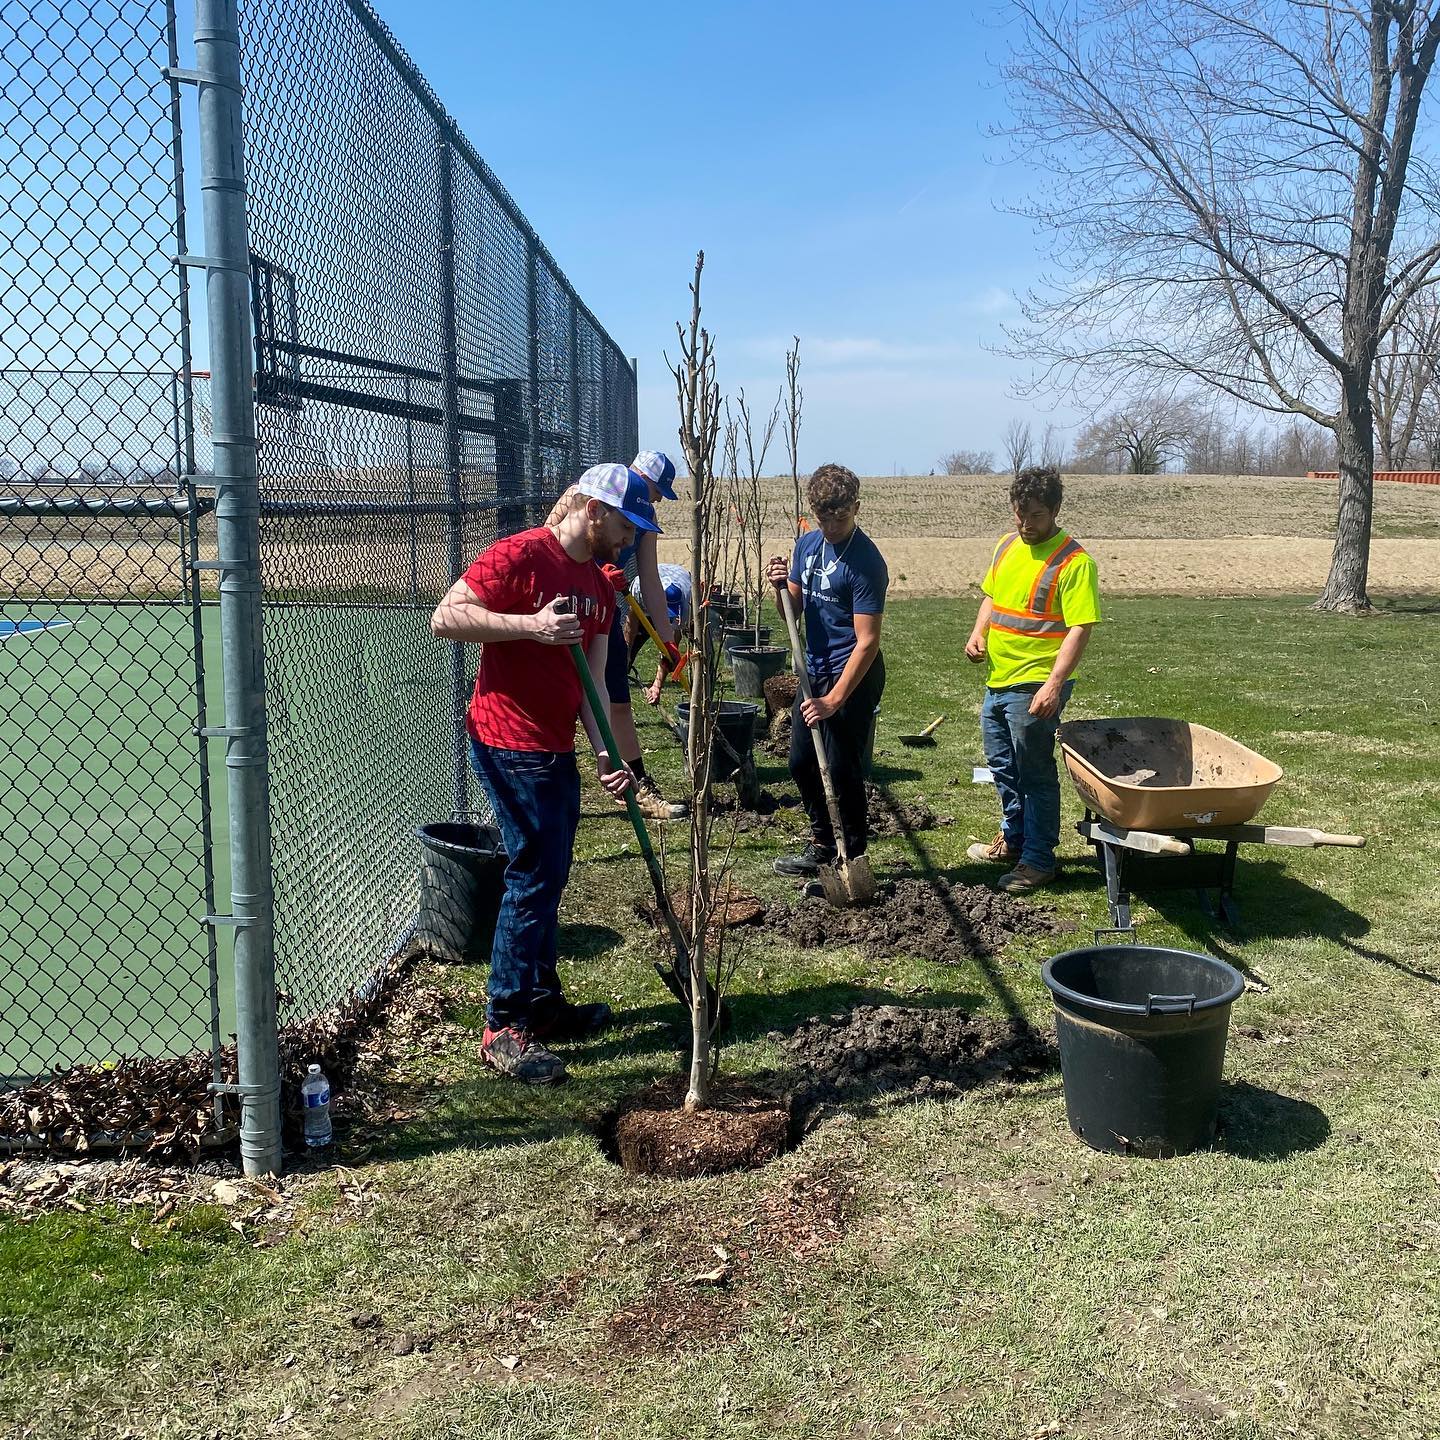 Three people are planting young trees by a fence on a sunny day. They have shovels, a wheelbarrow, and dirt buckets, indicating landscaping work.